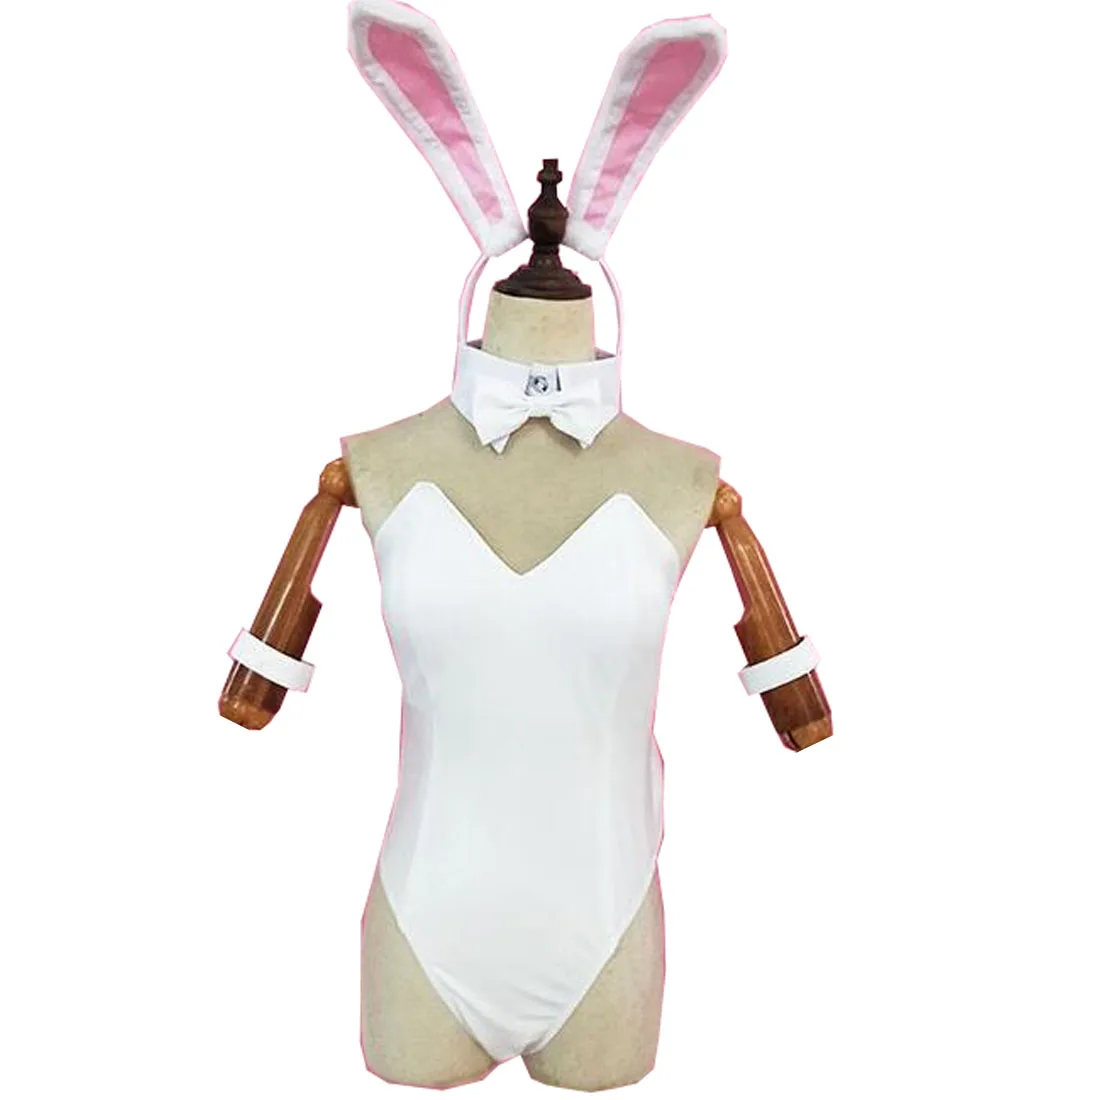 2019 Women Cosplay Costume DVA Bunny Girl Suits Sexy Cute Party Costumes Game Roleplay Lingerie Bodysuit Clubwear with Ear